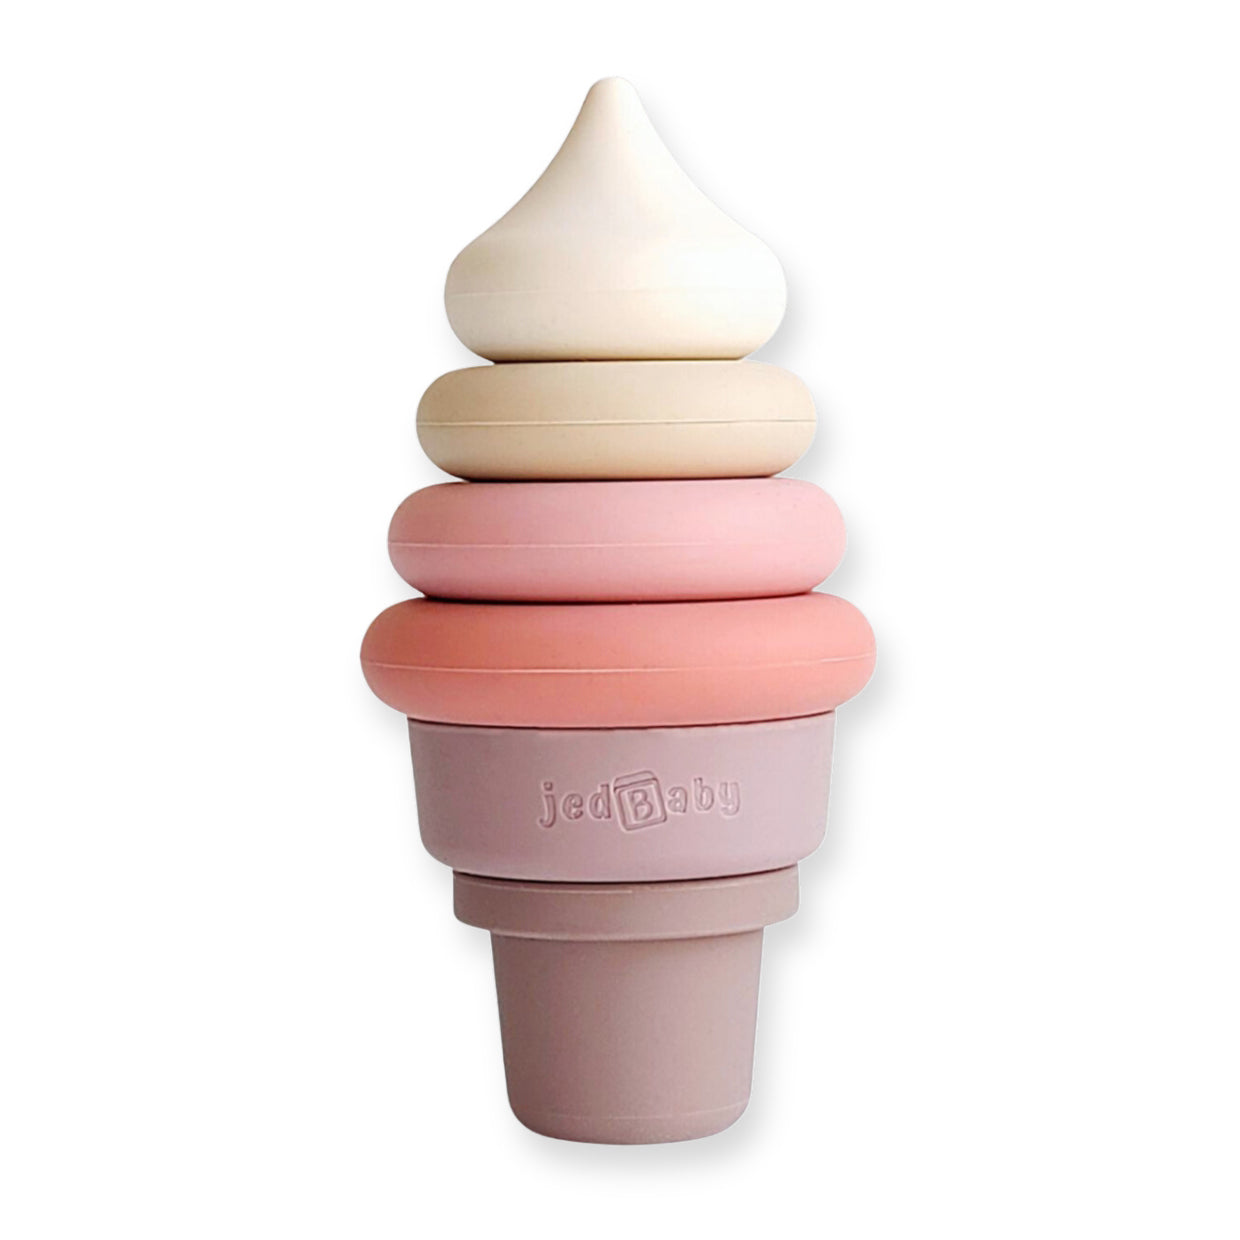 Jedbaby sweet ice cream silicone stacker toy